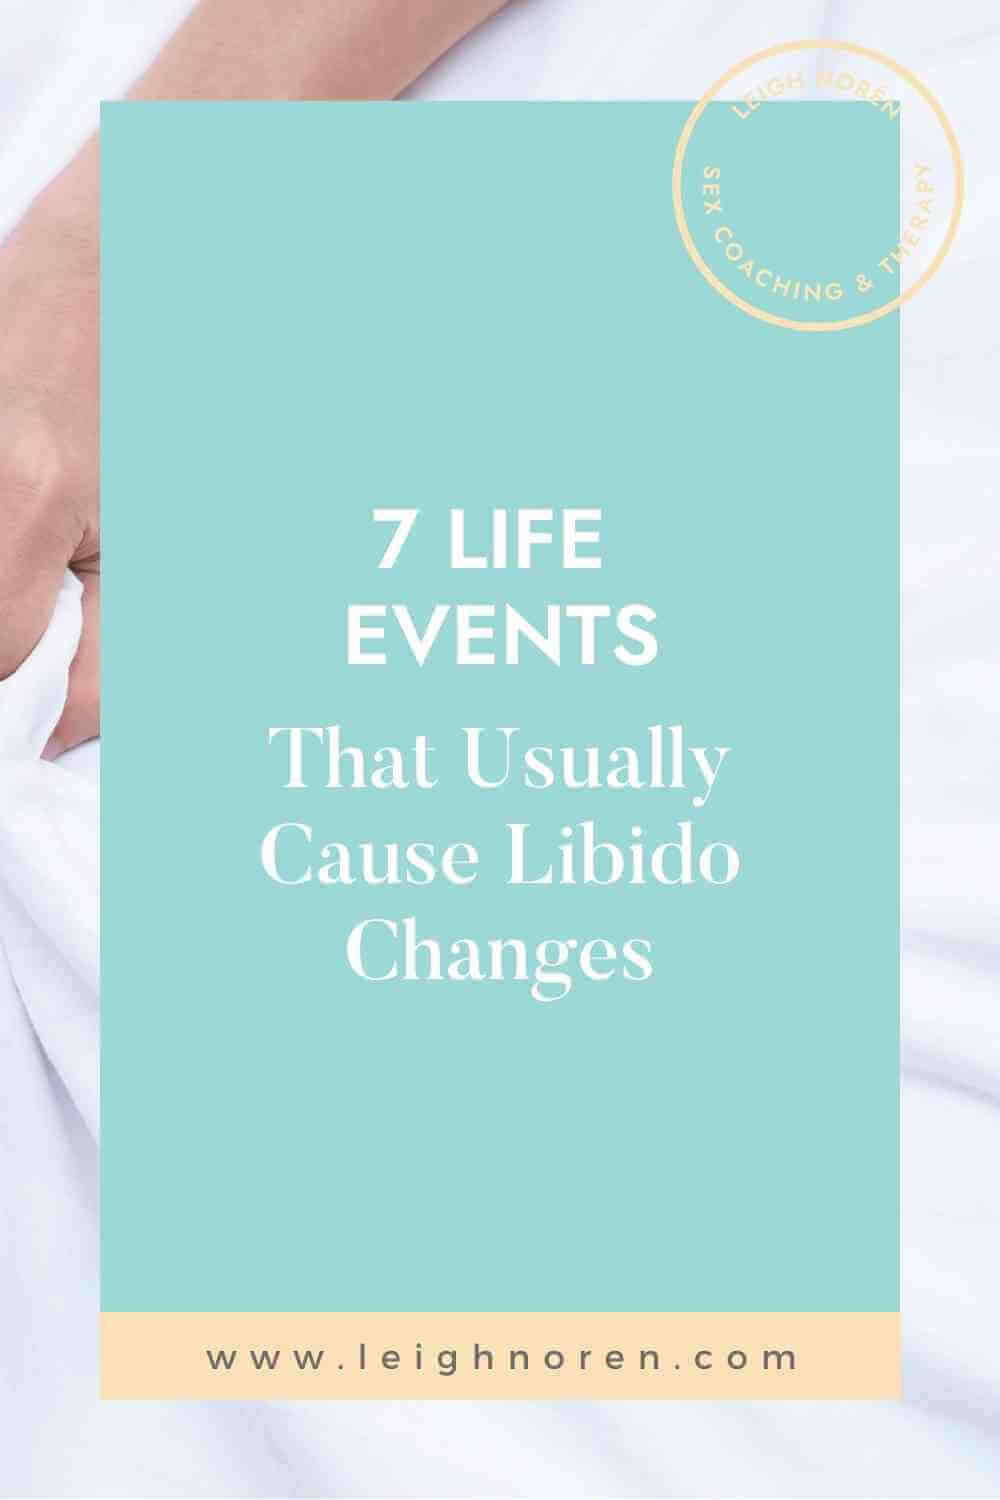 7 Life Events That Usually Cause Libido Changes